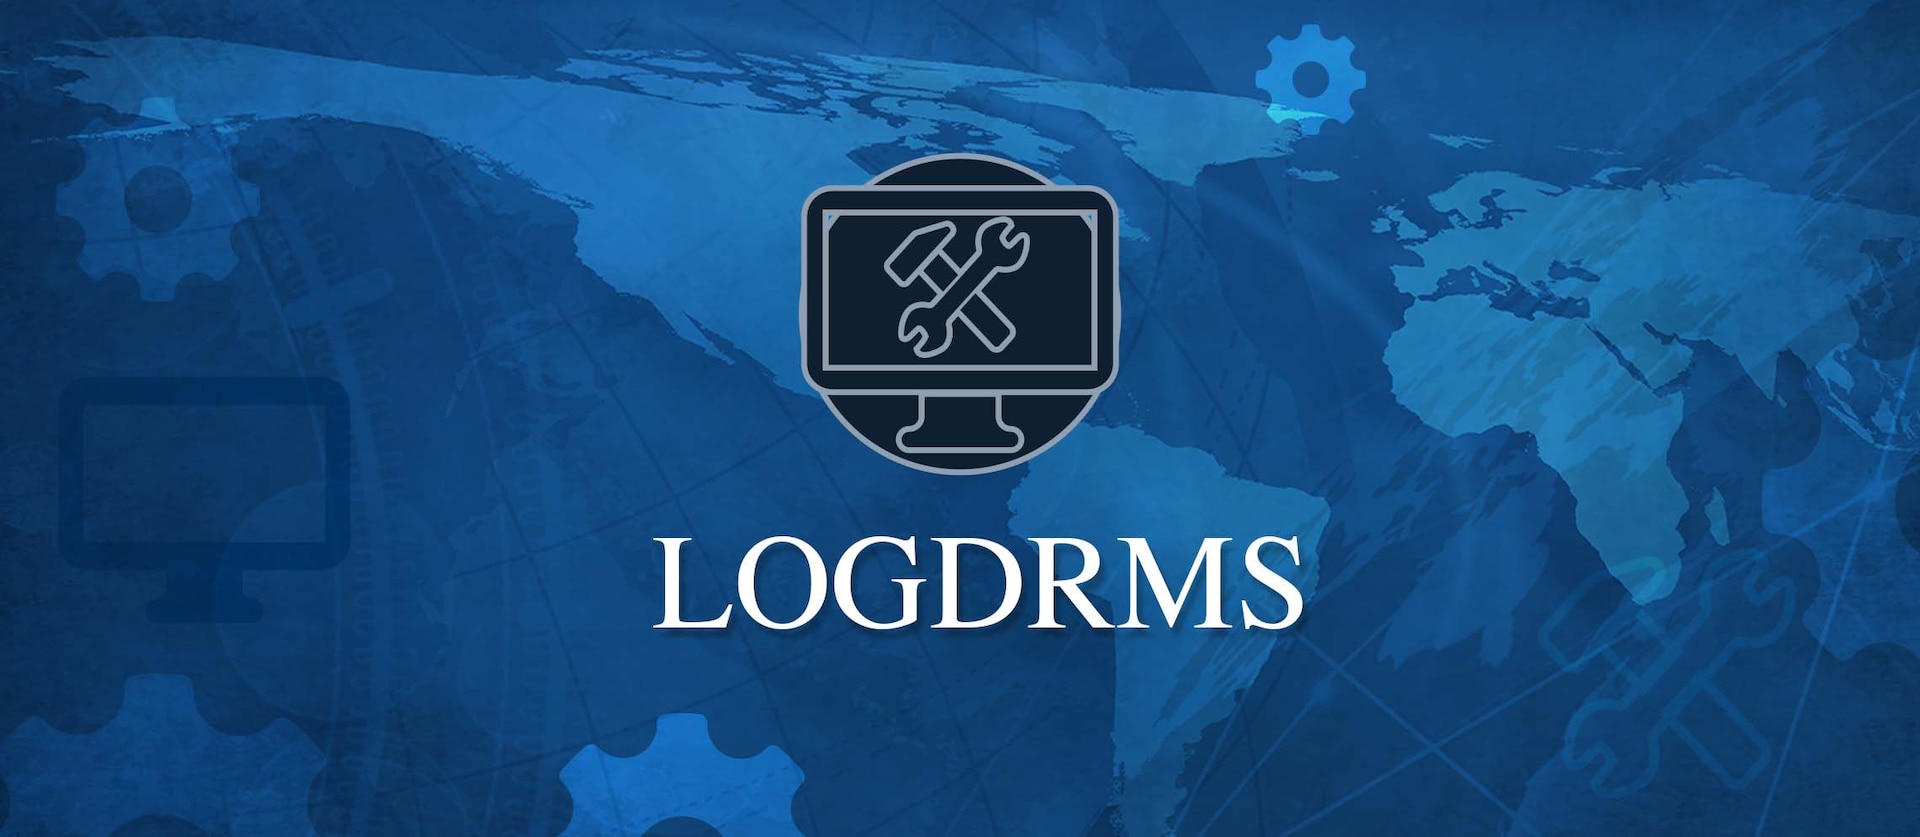 Banner graphic for LOGDRMS application